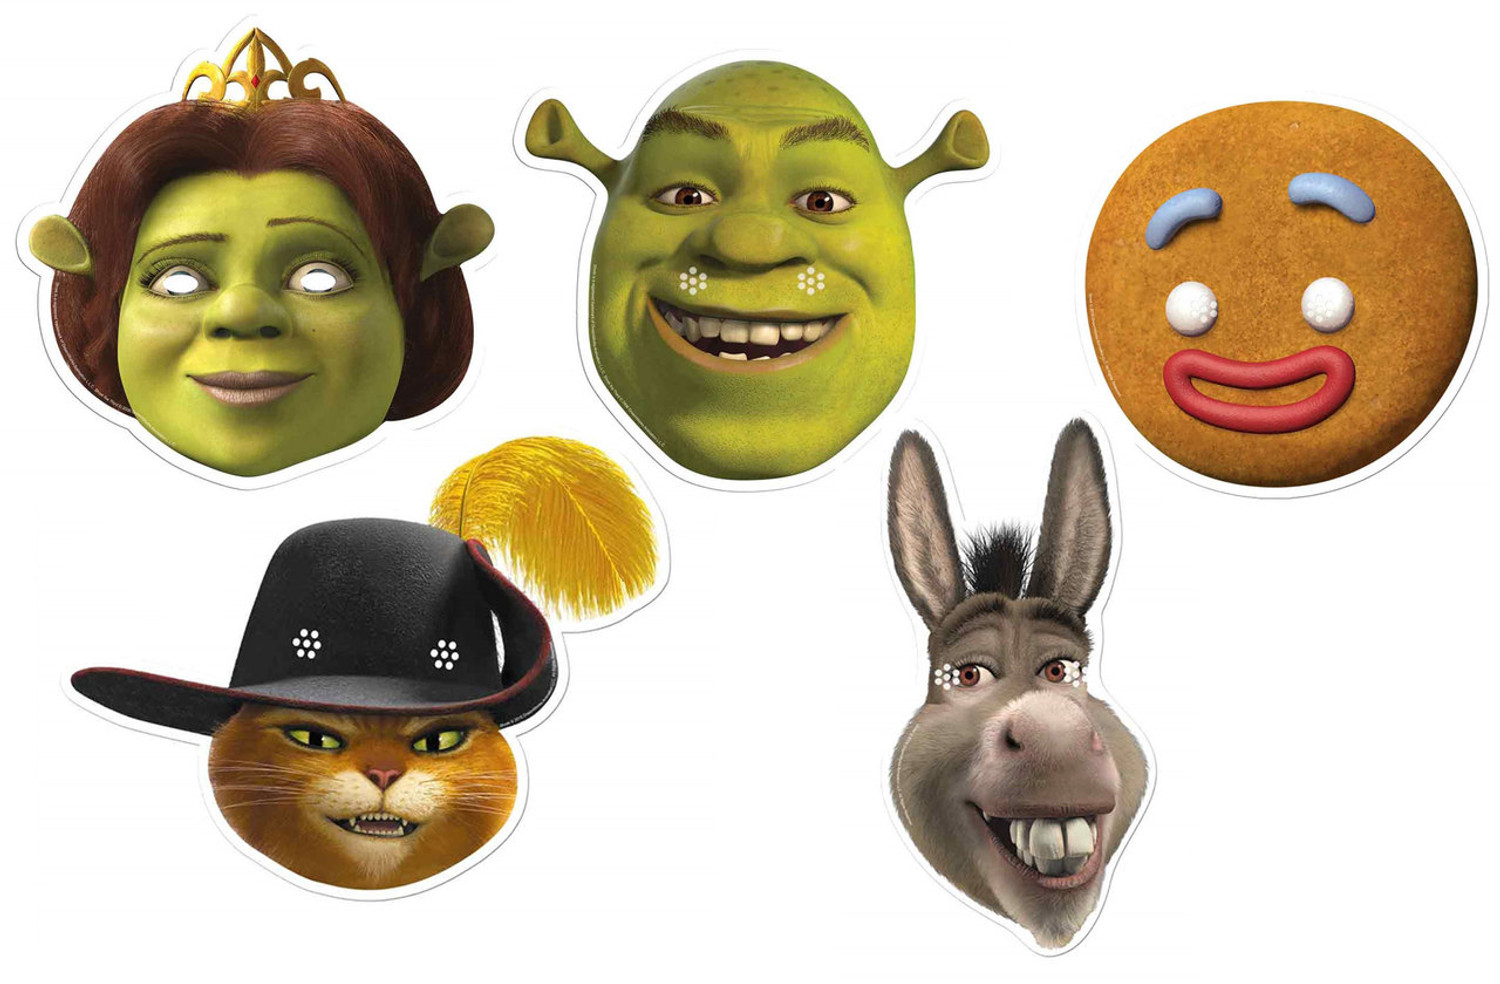 Shrek face mask - for children and adults for Halloween or carnival